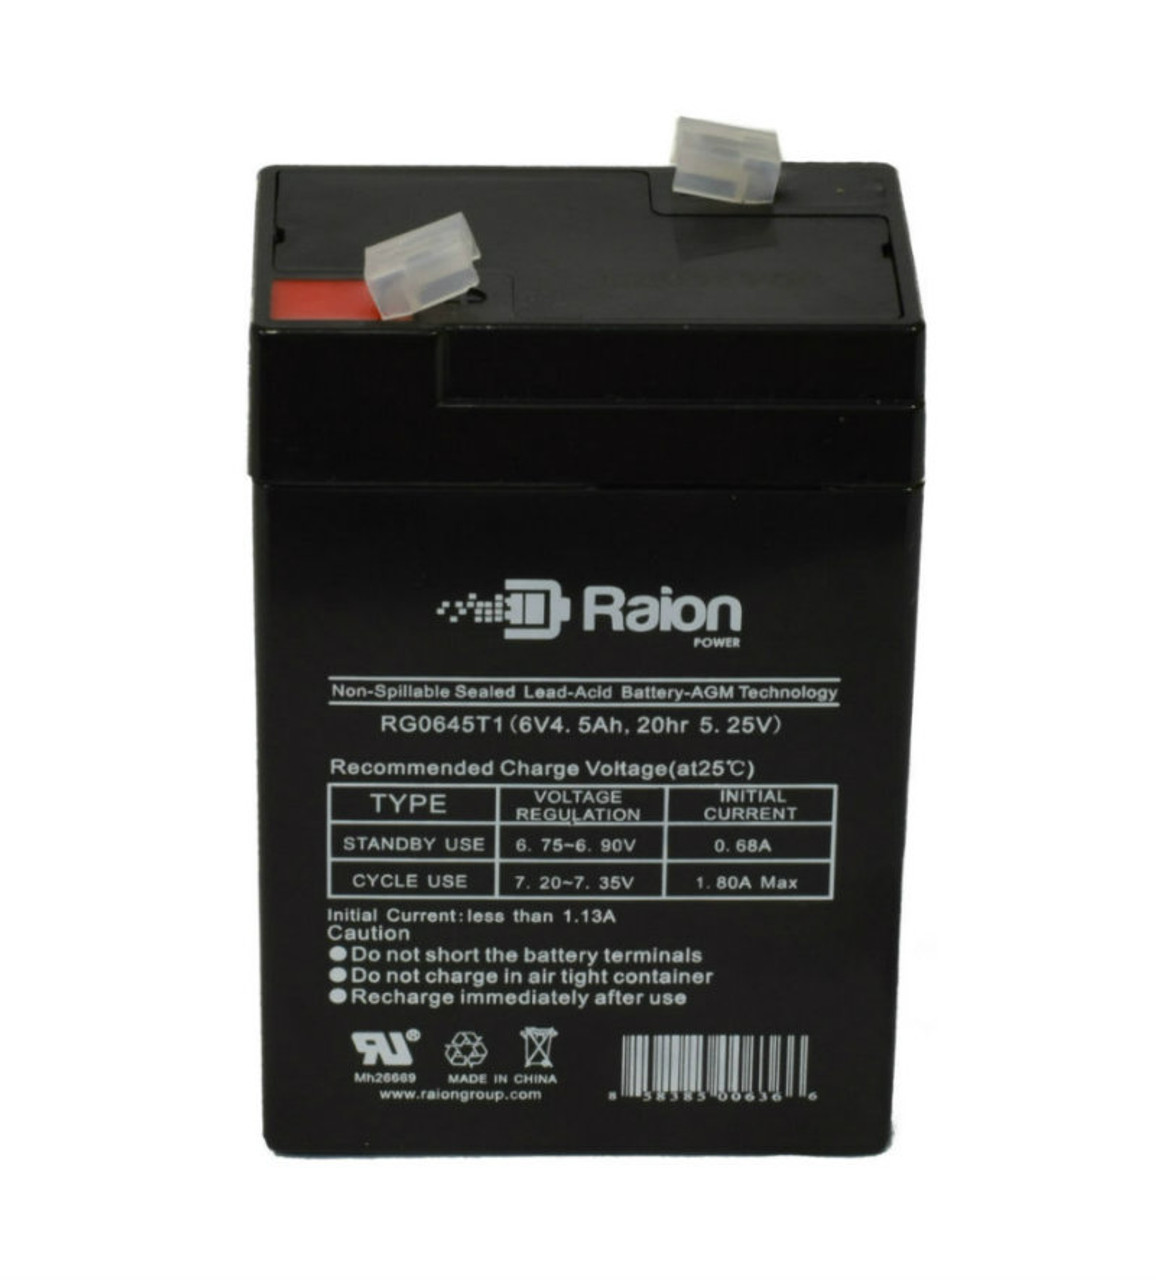 Raion Power RG0645T1 Replacement Battery Cartridge for Tork UB645-6V